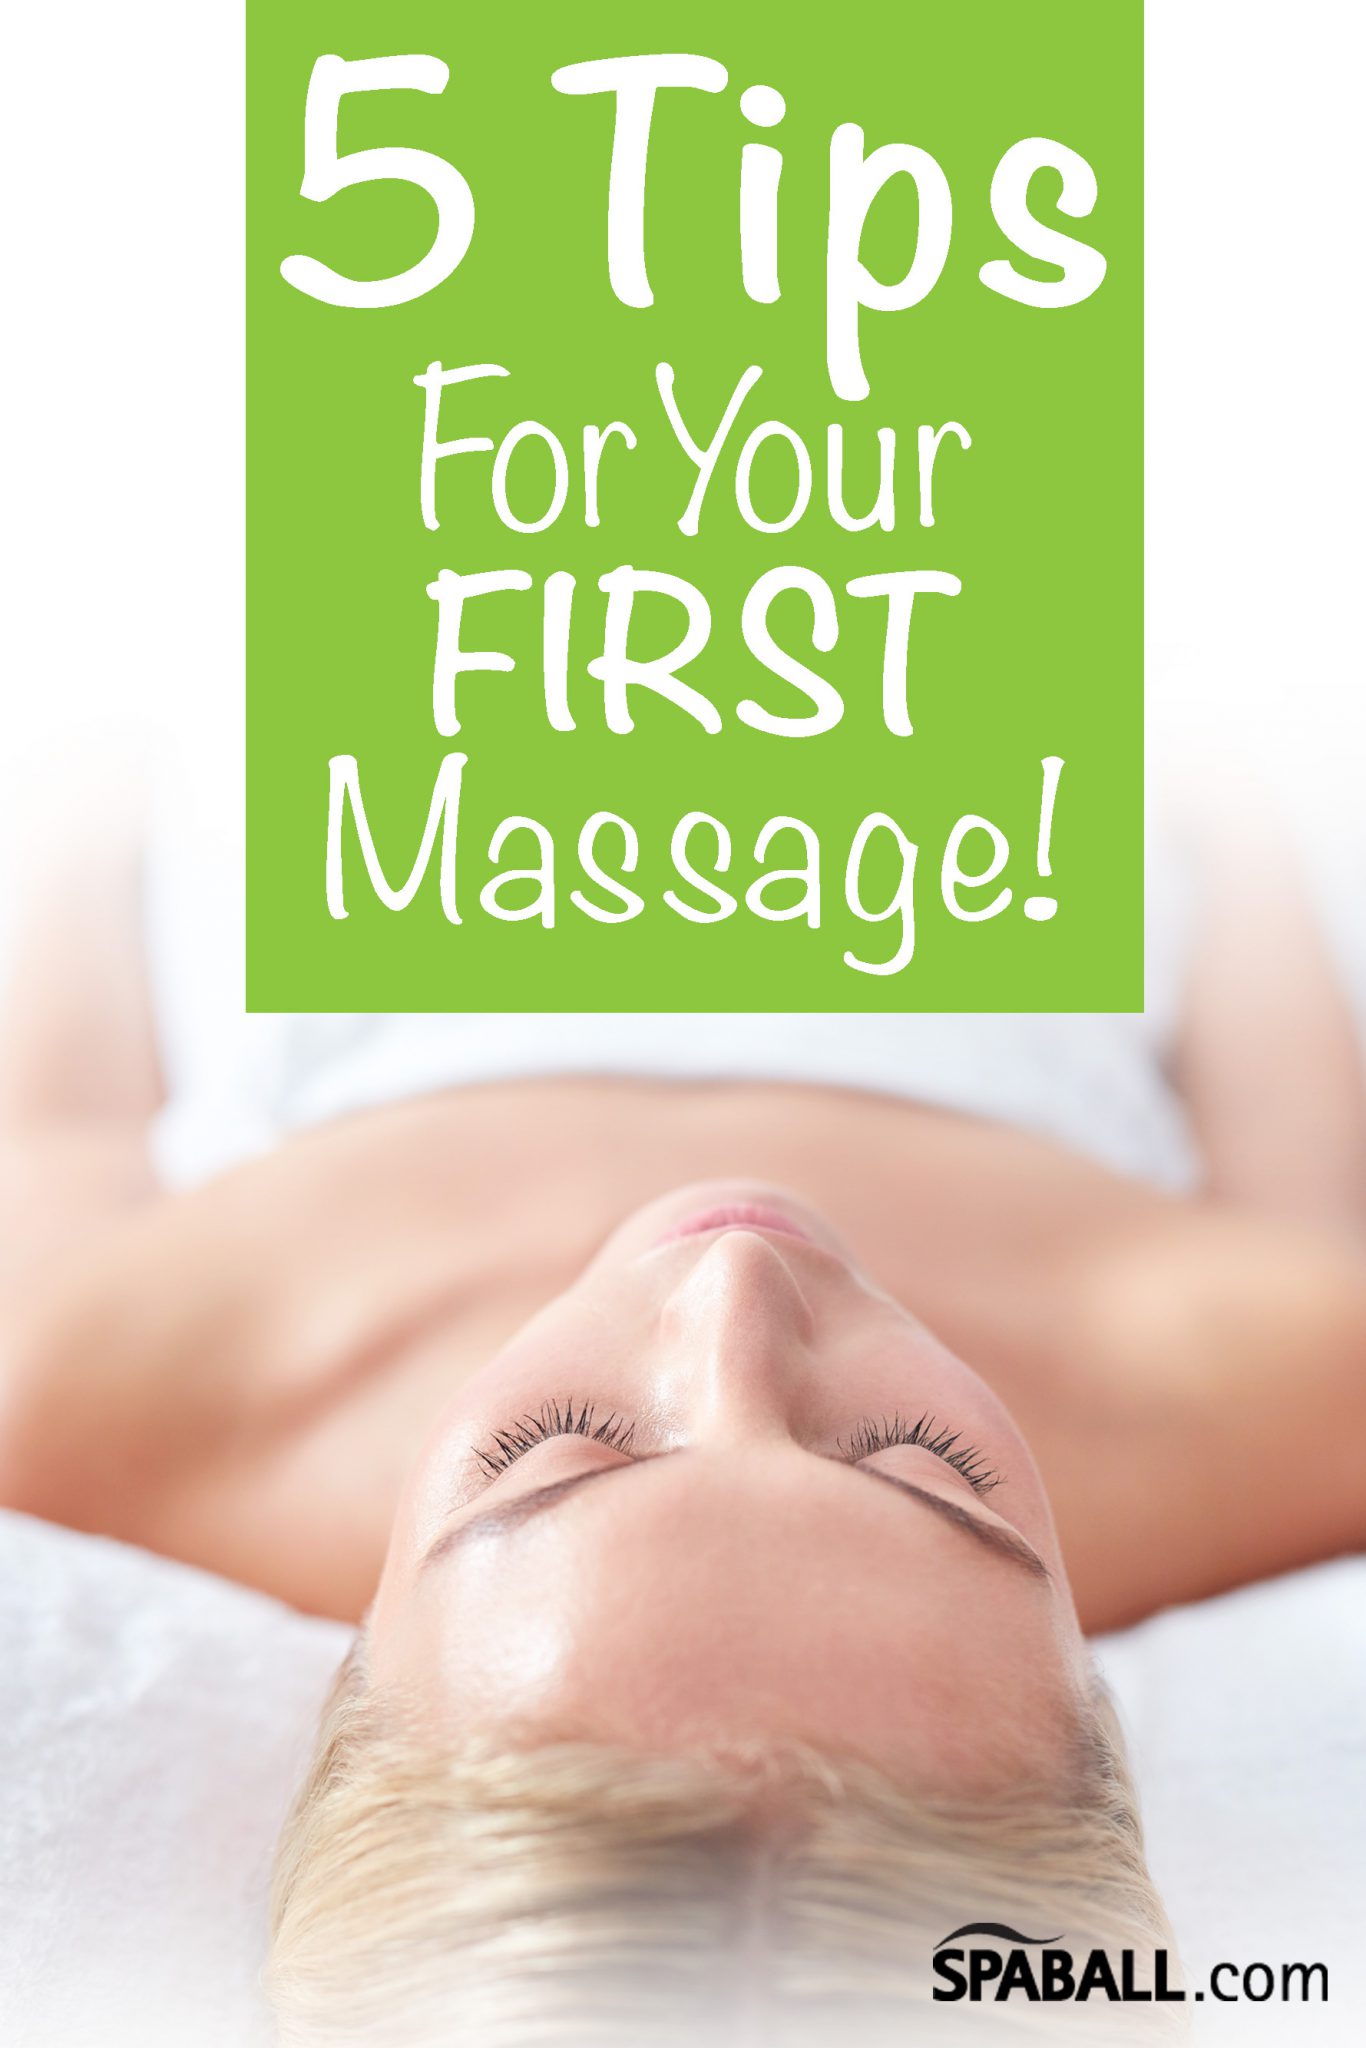 5 Tips For Your FIRST Massage!